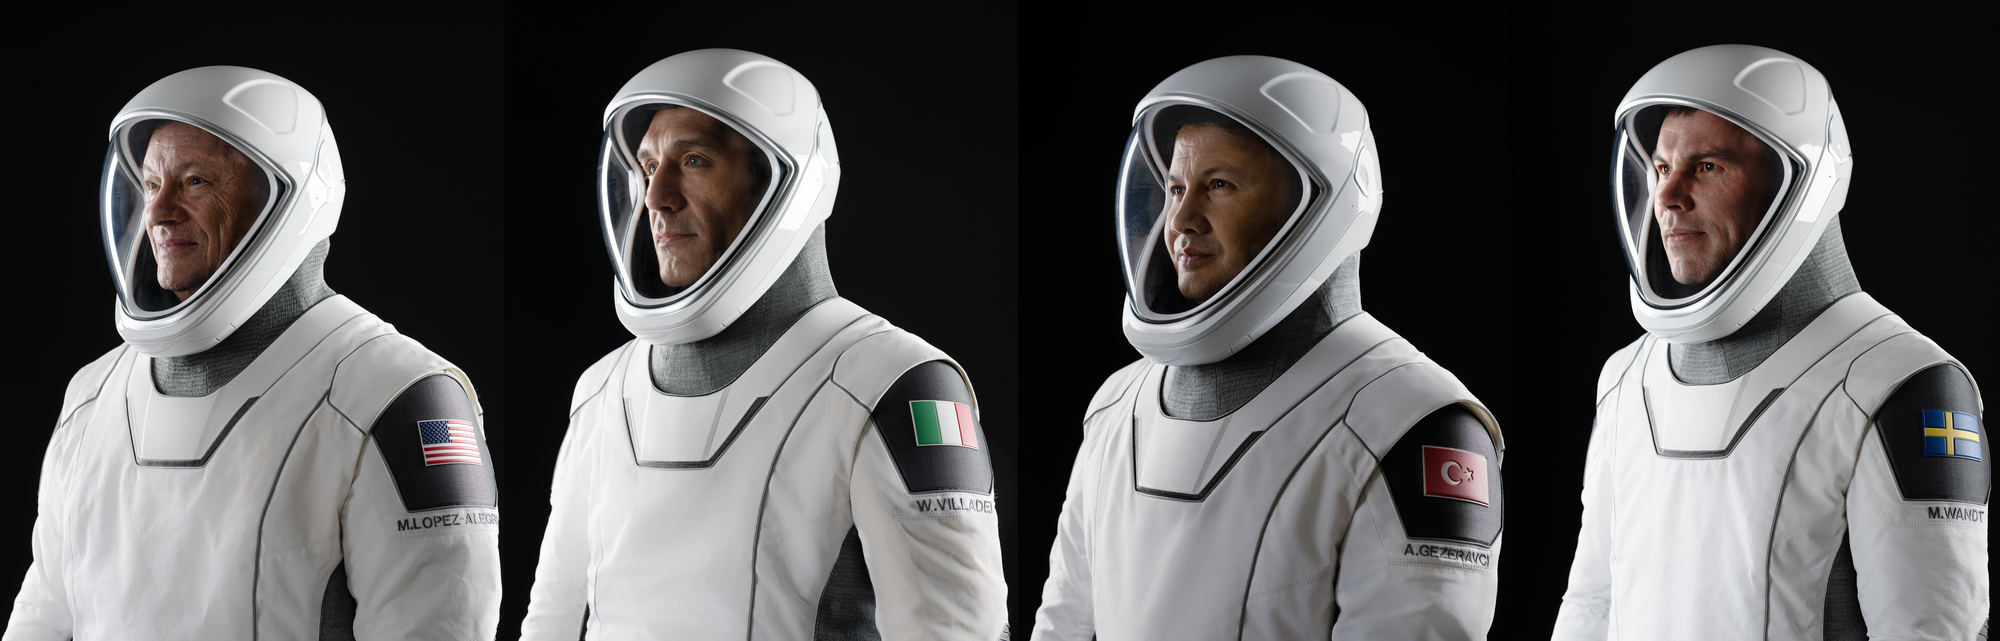 The Axiom-3 crew in their spacesuits (from left to right); Michael López-Alegría, Walter Villadei, Alper Gezeravcı, and Marcus Wandt. ©Axiom Space  